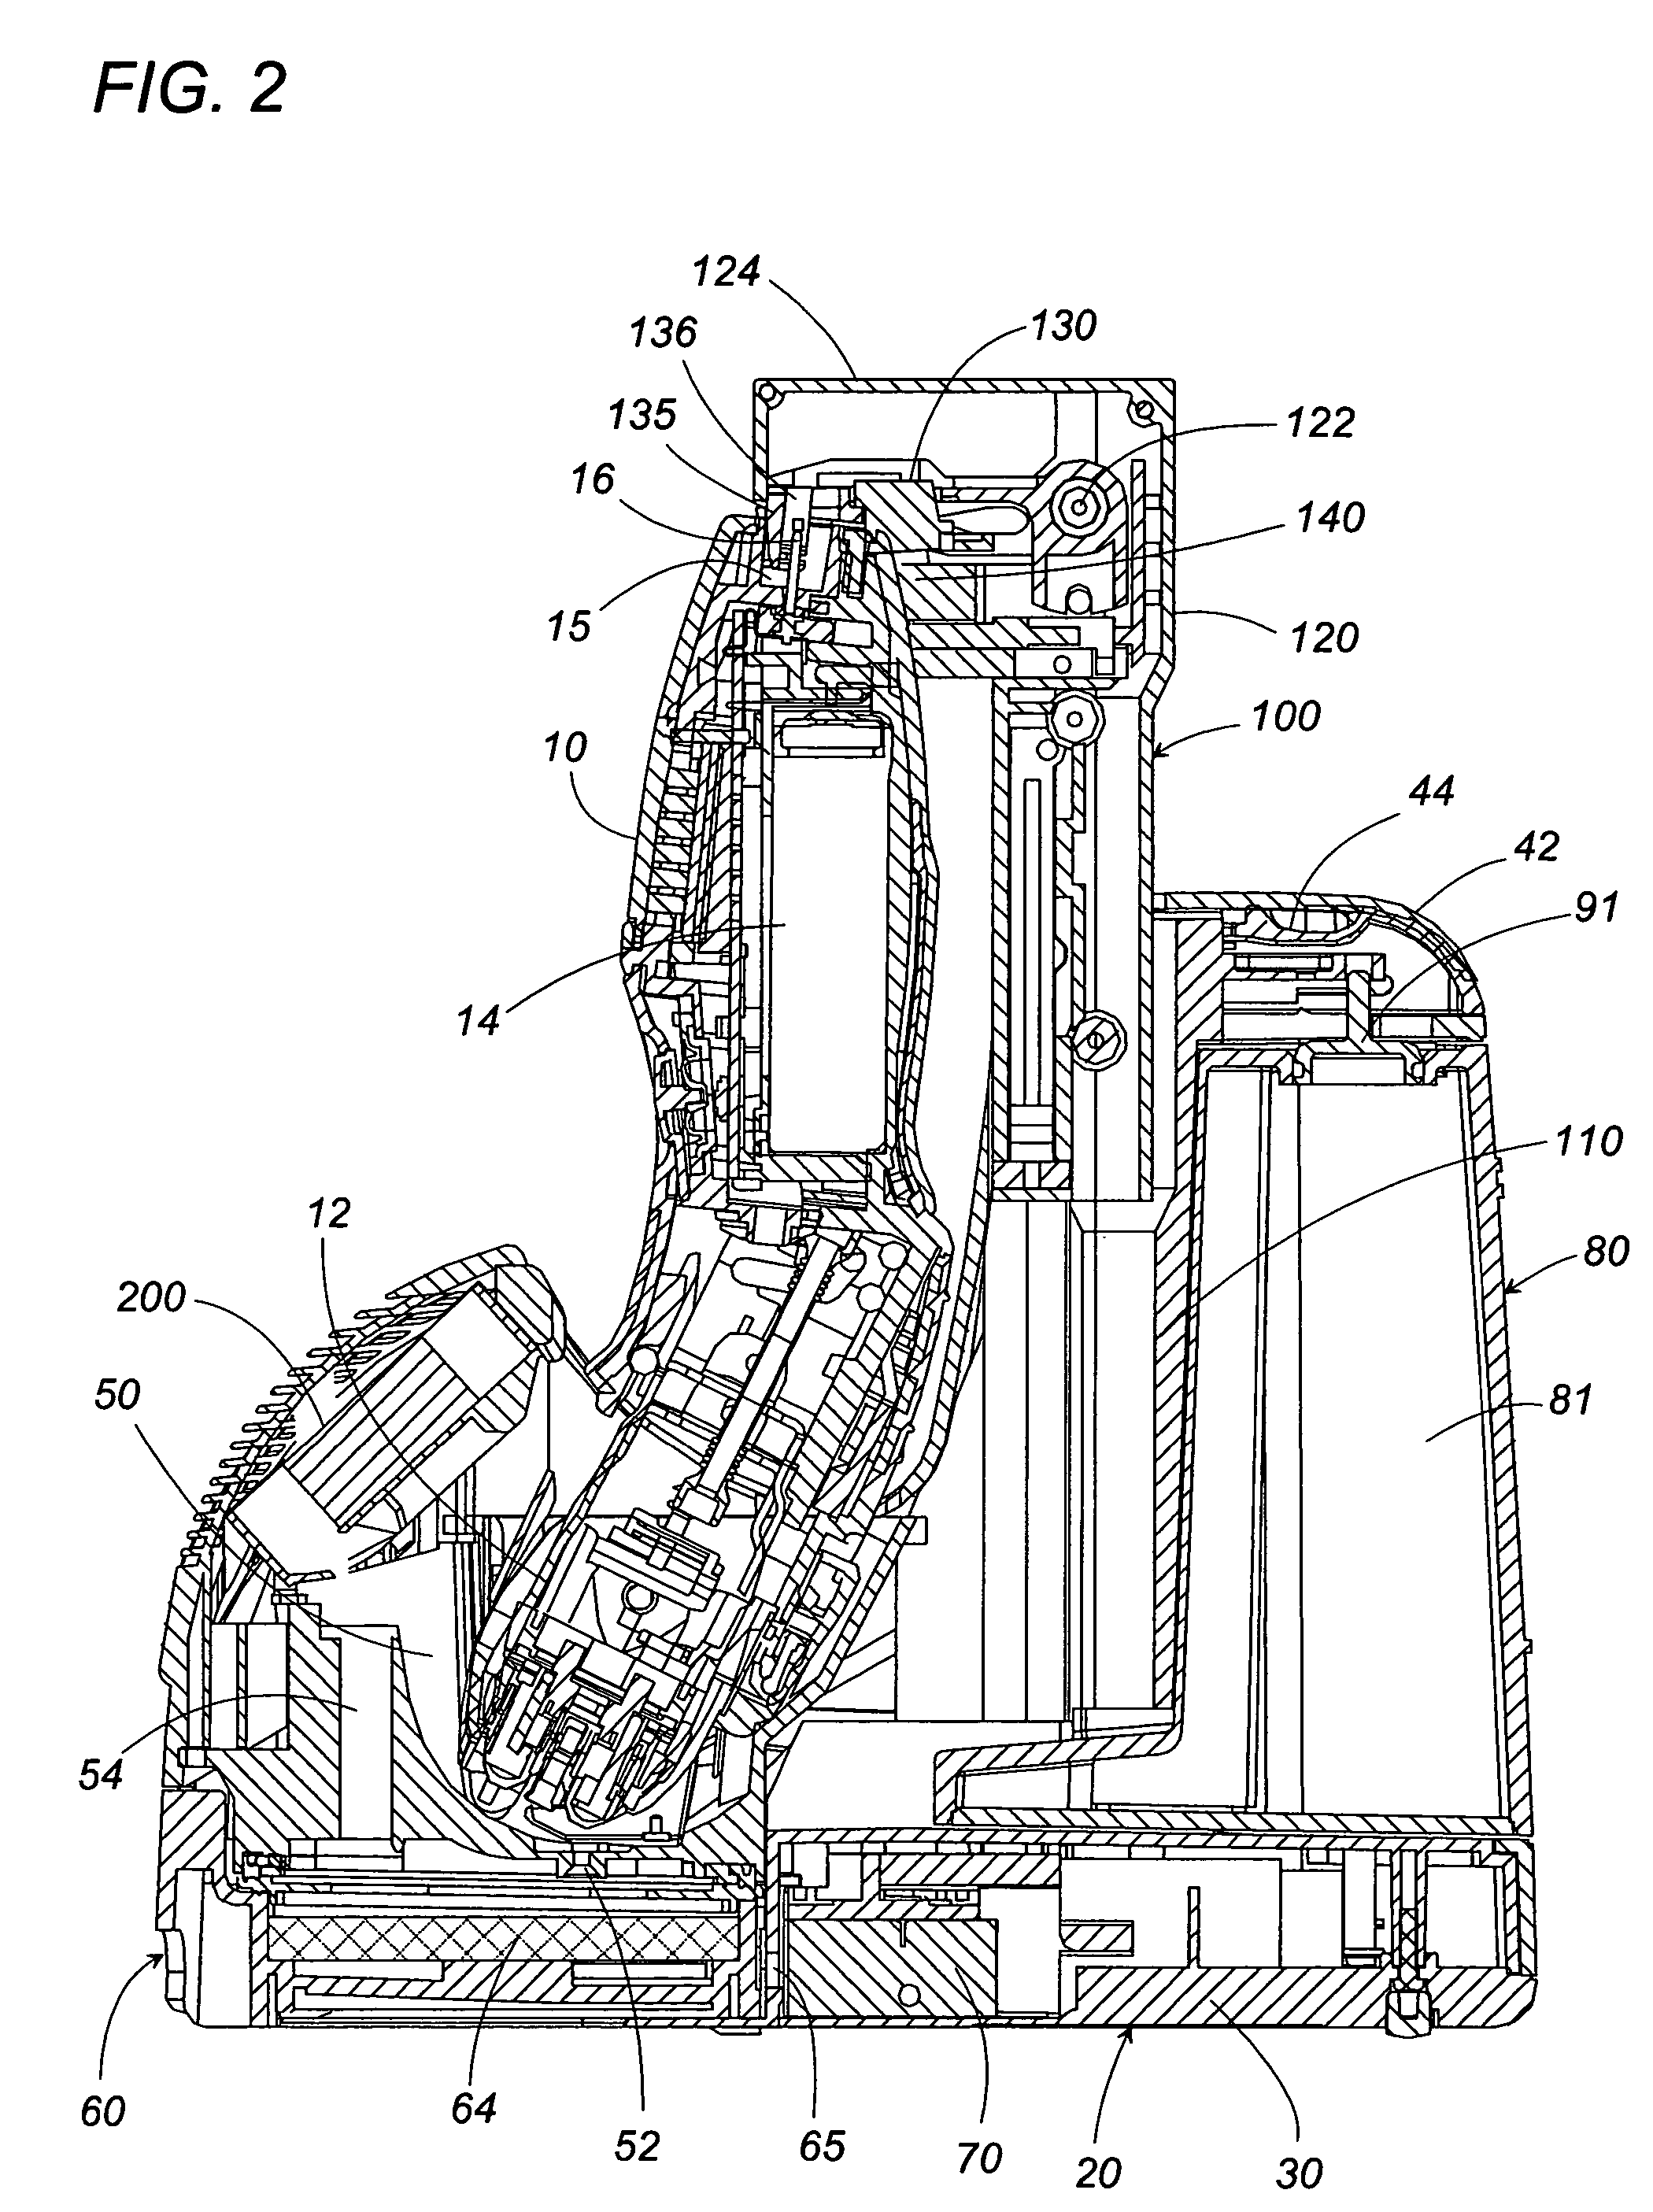 Cleaning device for an electrical hair removing apparatus